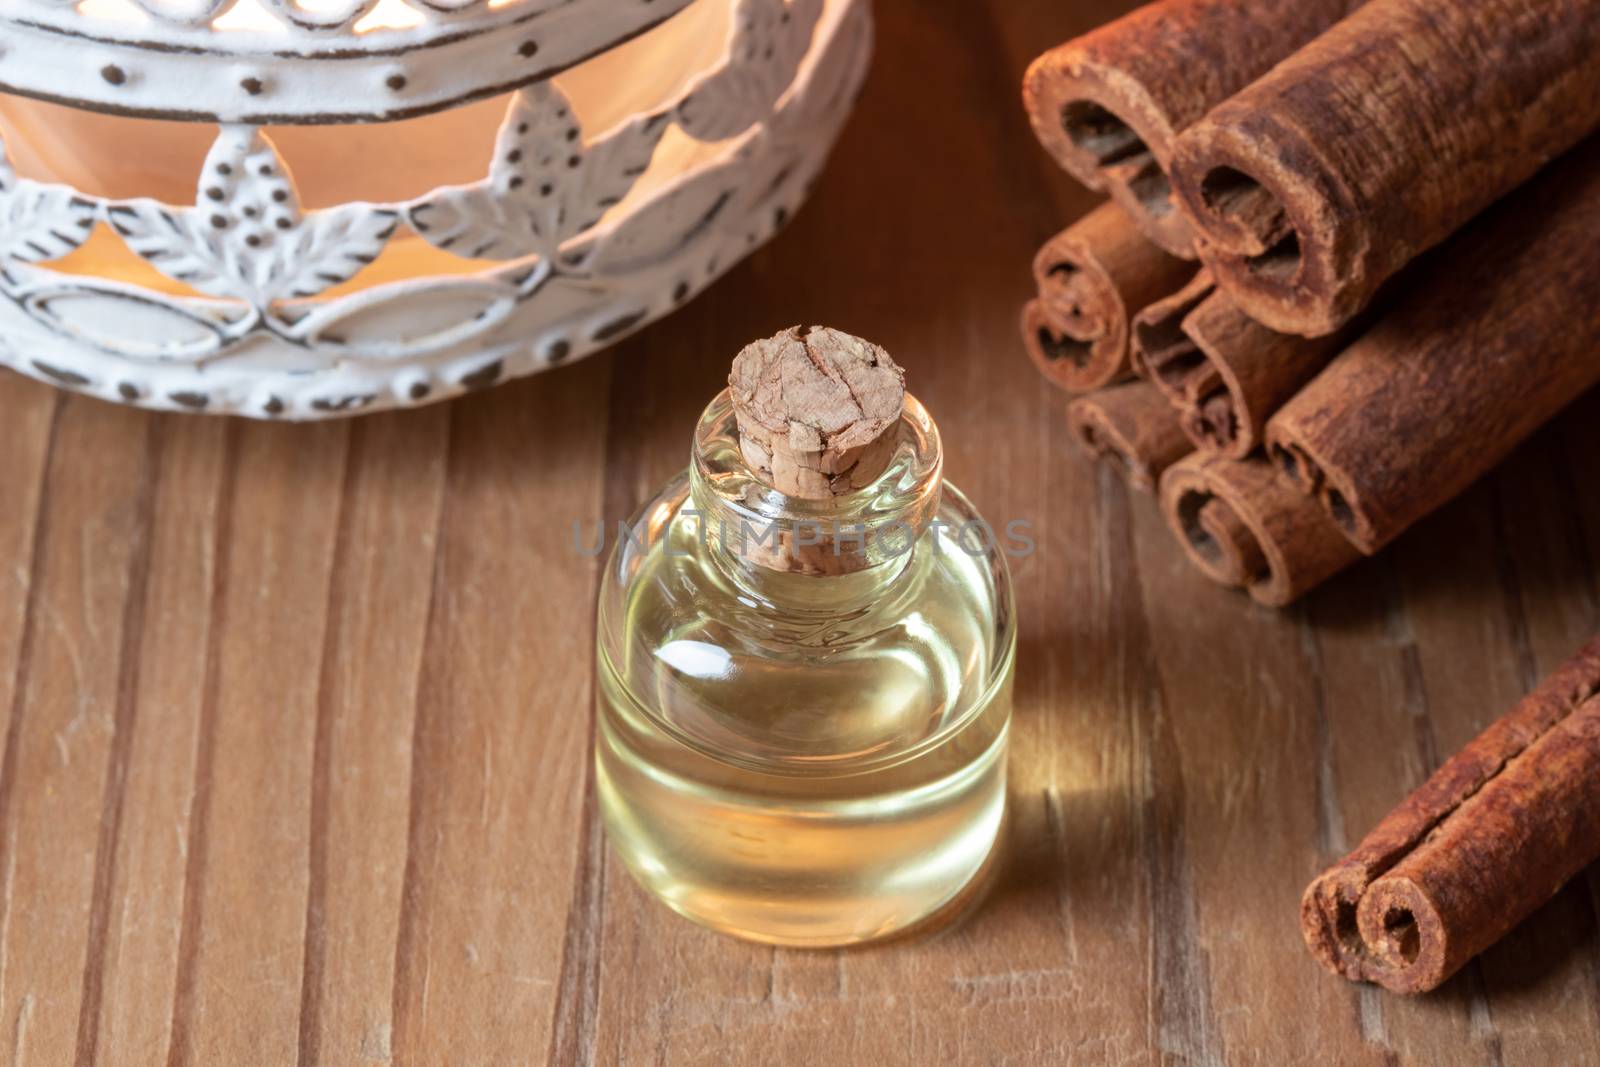 A bottle of essential oil with cinnamon sticks